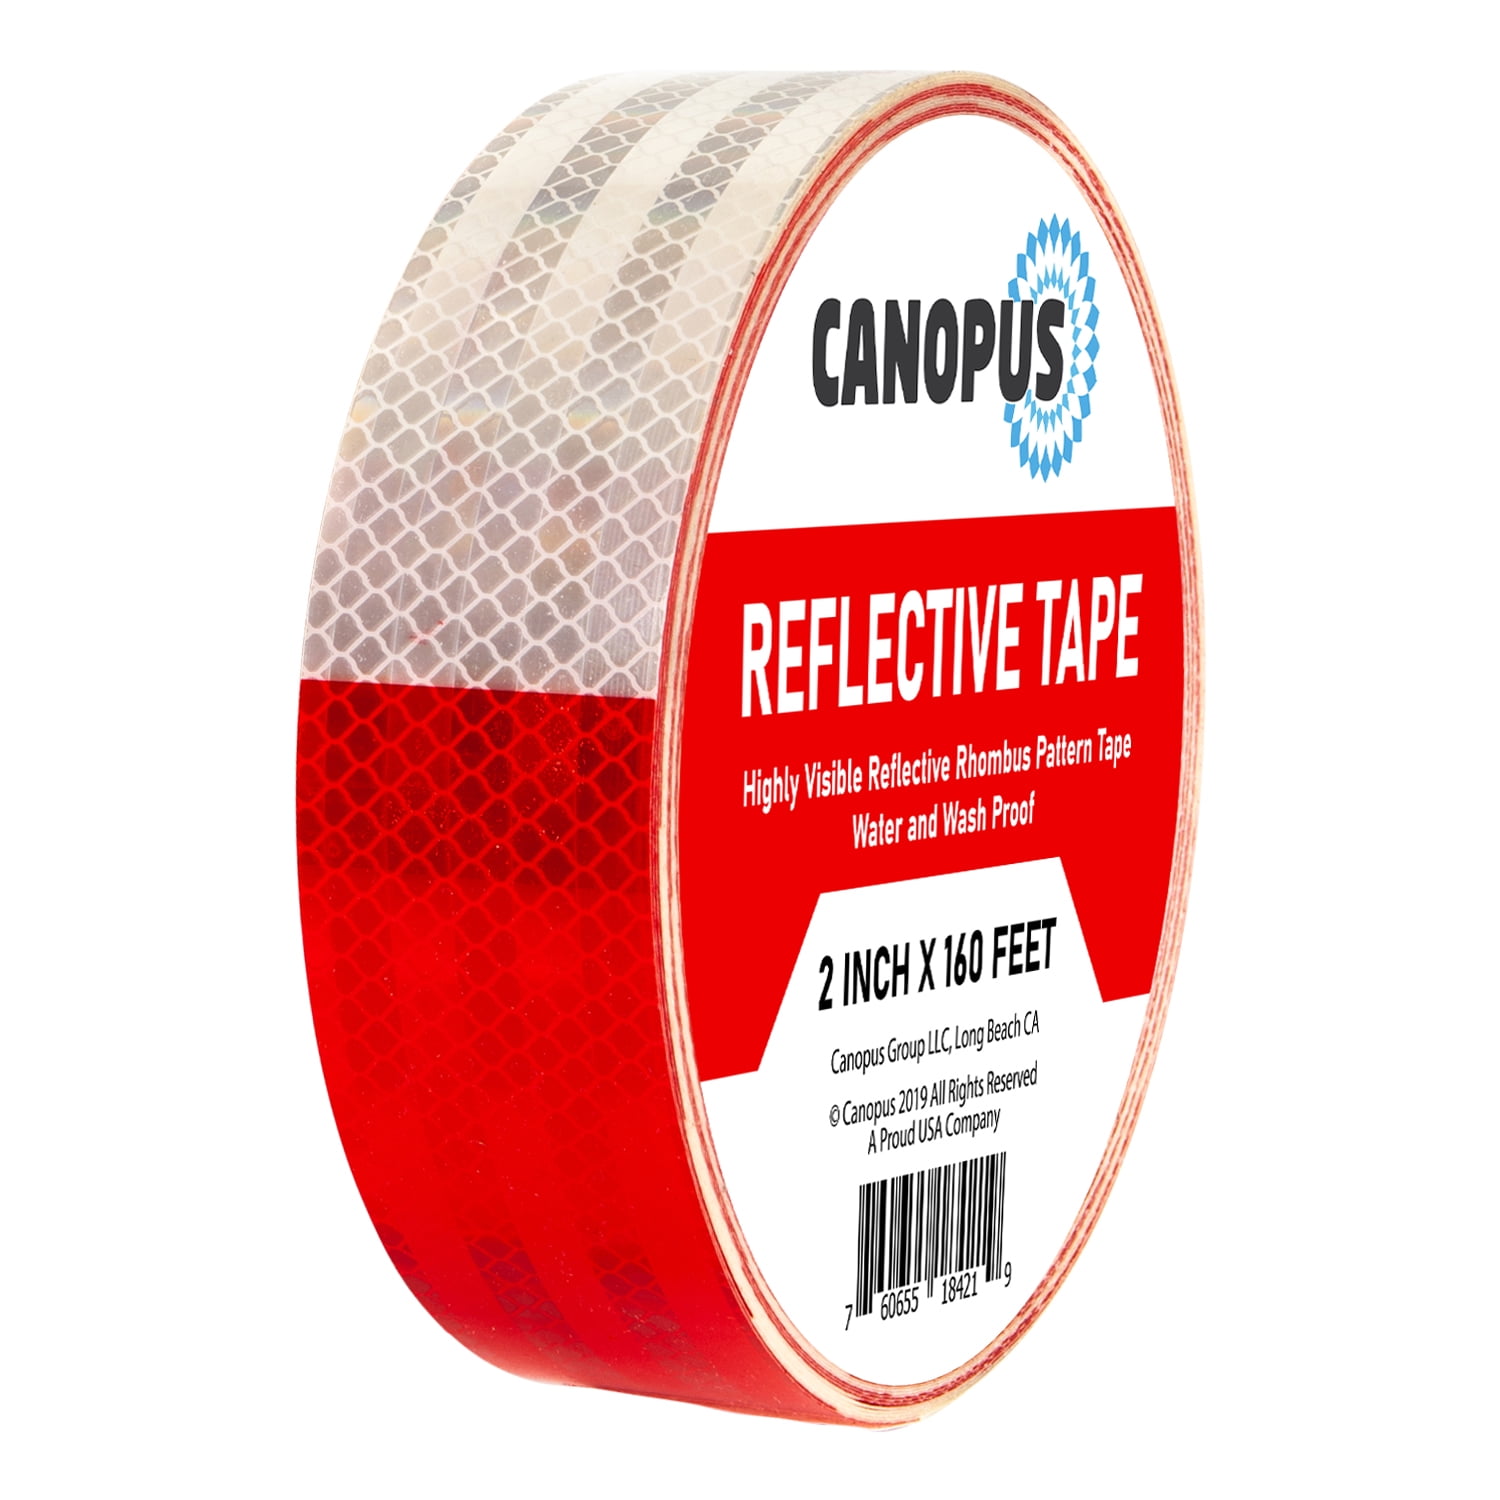 Waterproof Red White Conspicuity Tape Self-Adhesive PET Safey Warning Tape 2 inch DOT Tape for Trucks Trailers Autos Starrey Reflective Tape Roll 2X10 DOT-C2 Approved 